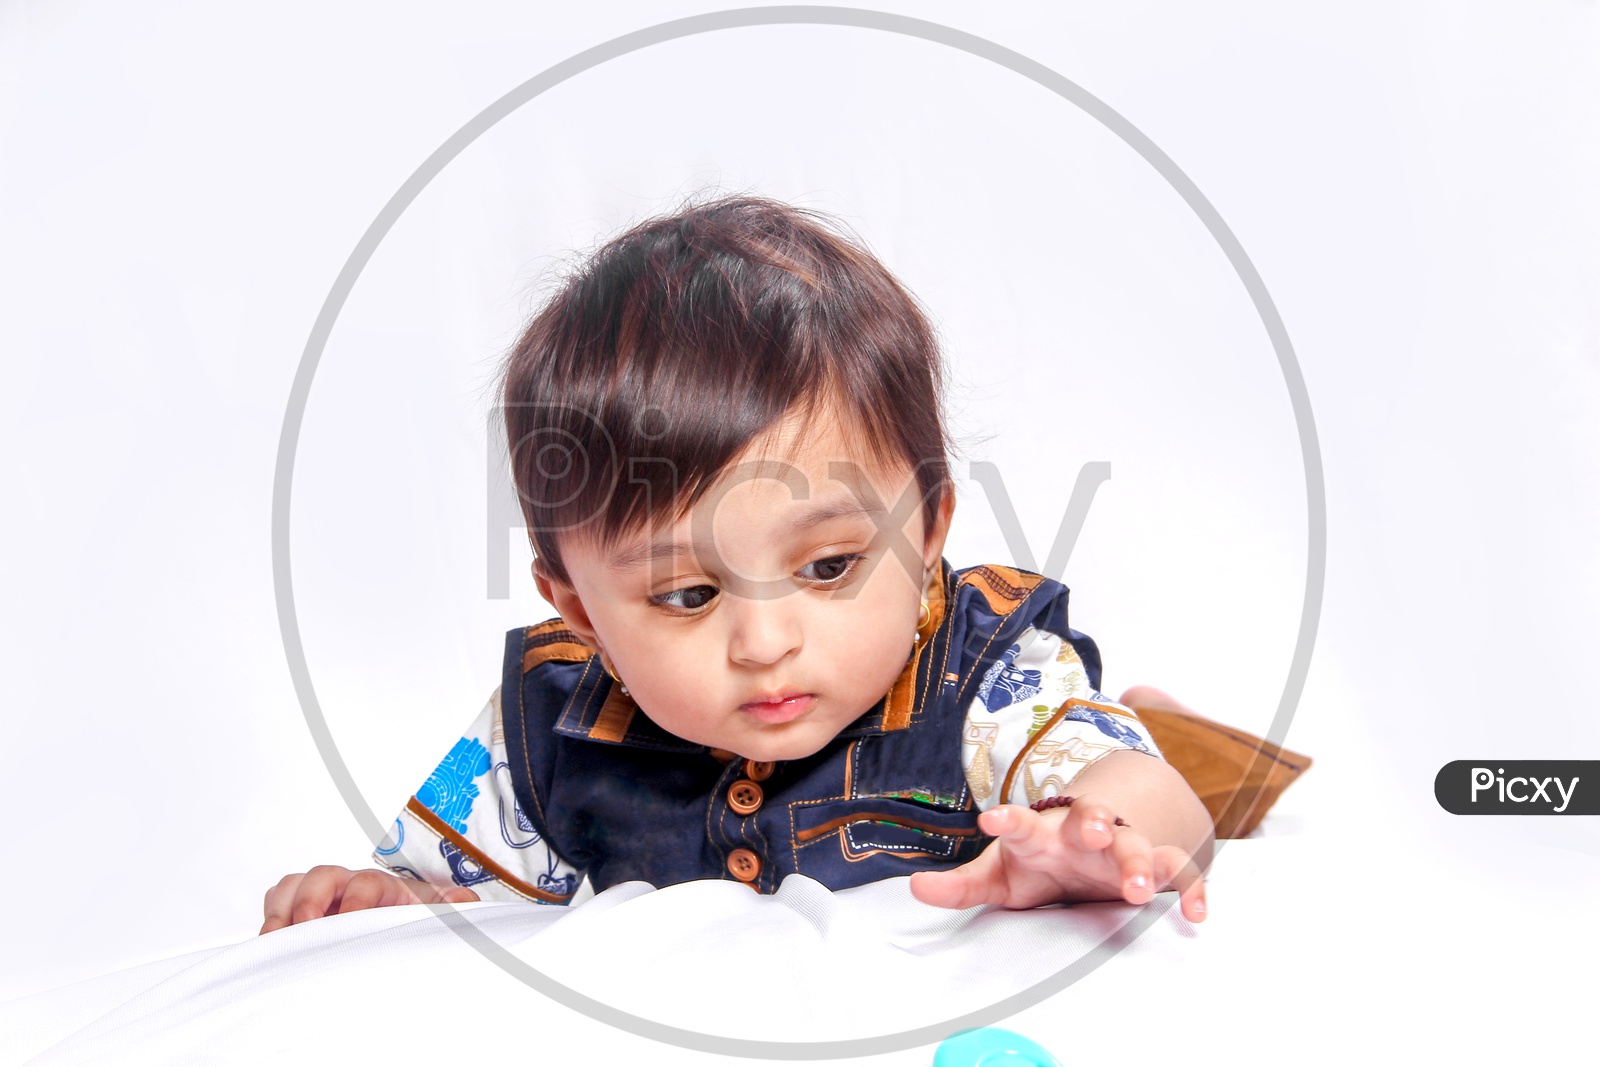 Cute Indian Baby Child Playing in House or Home  Background